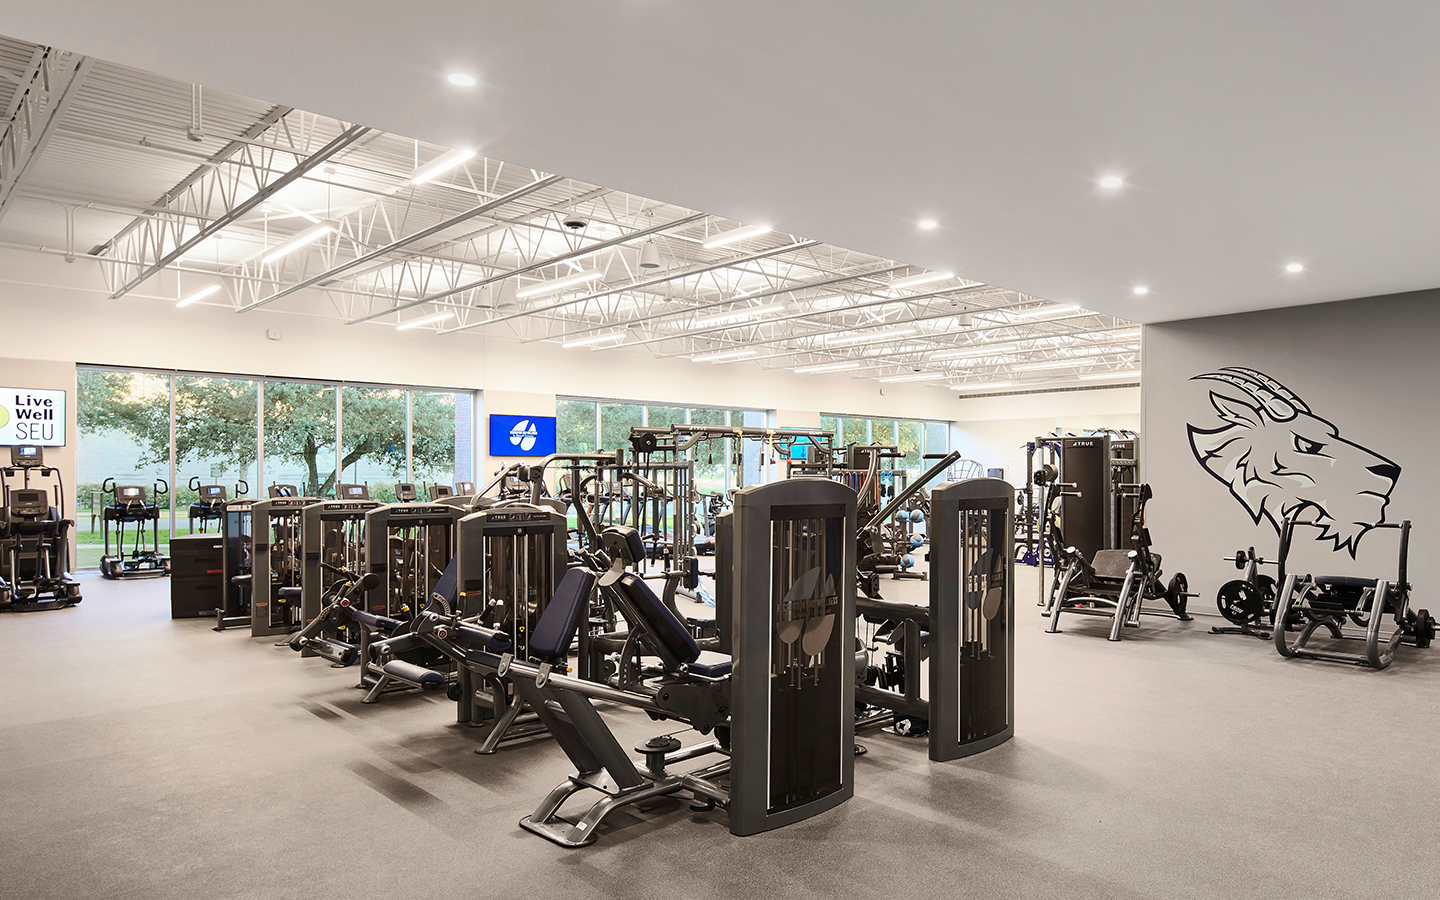 Gym facility of Recreation and Athletic Center by Specht Novak Architects. Shot by Andrea Calo.